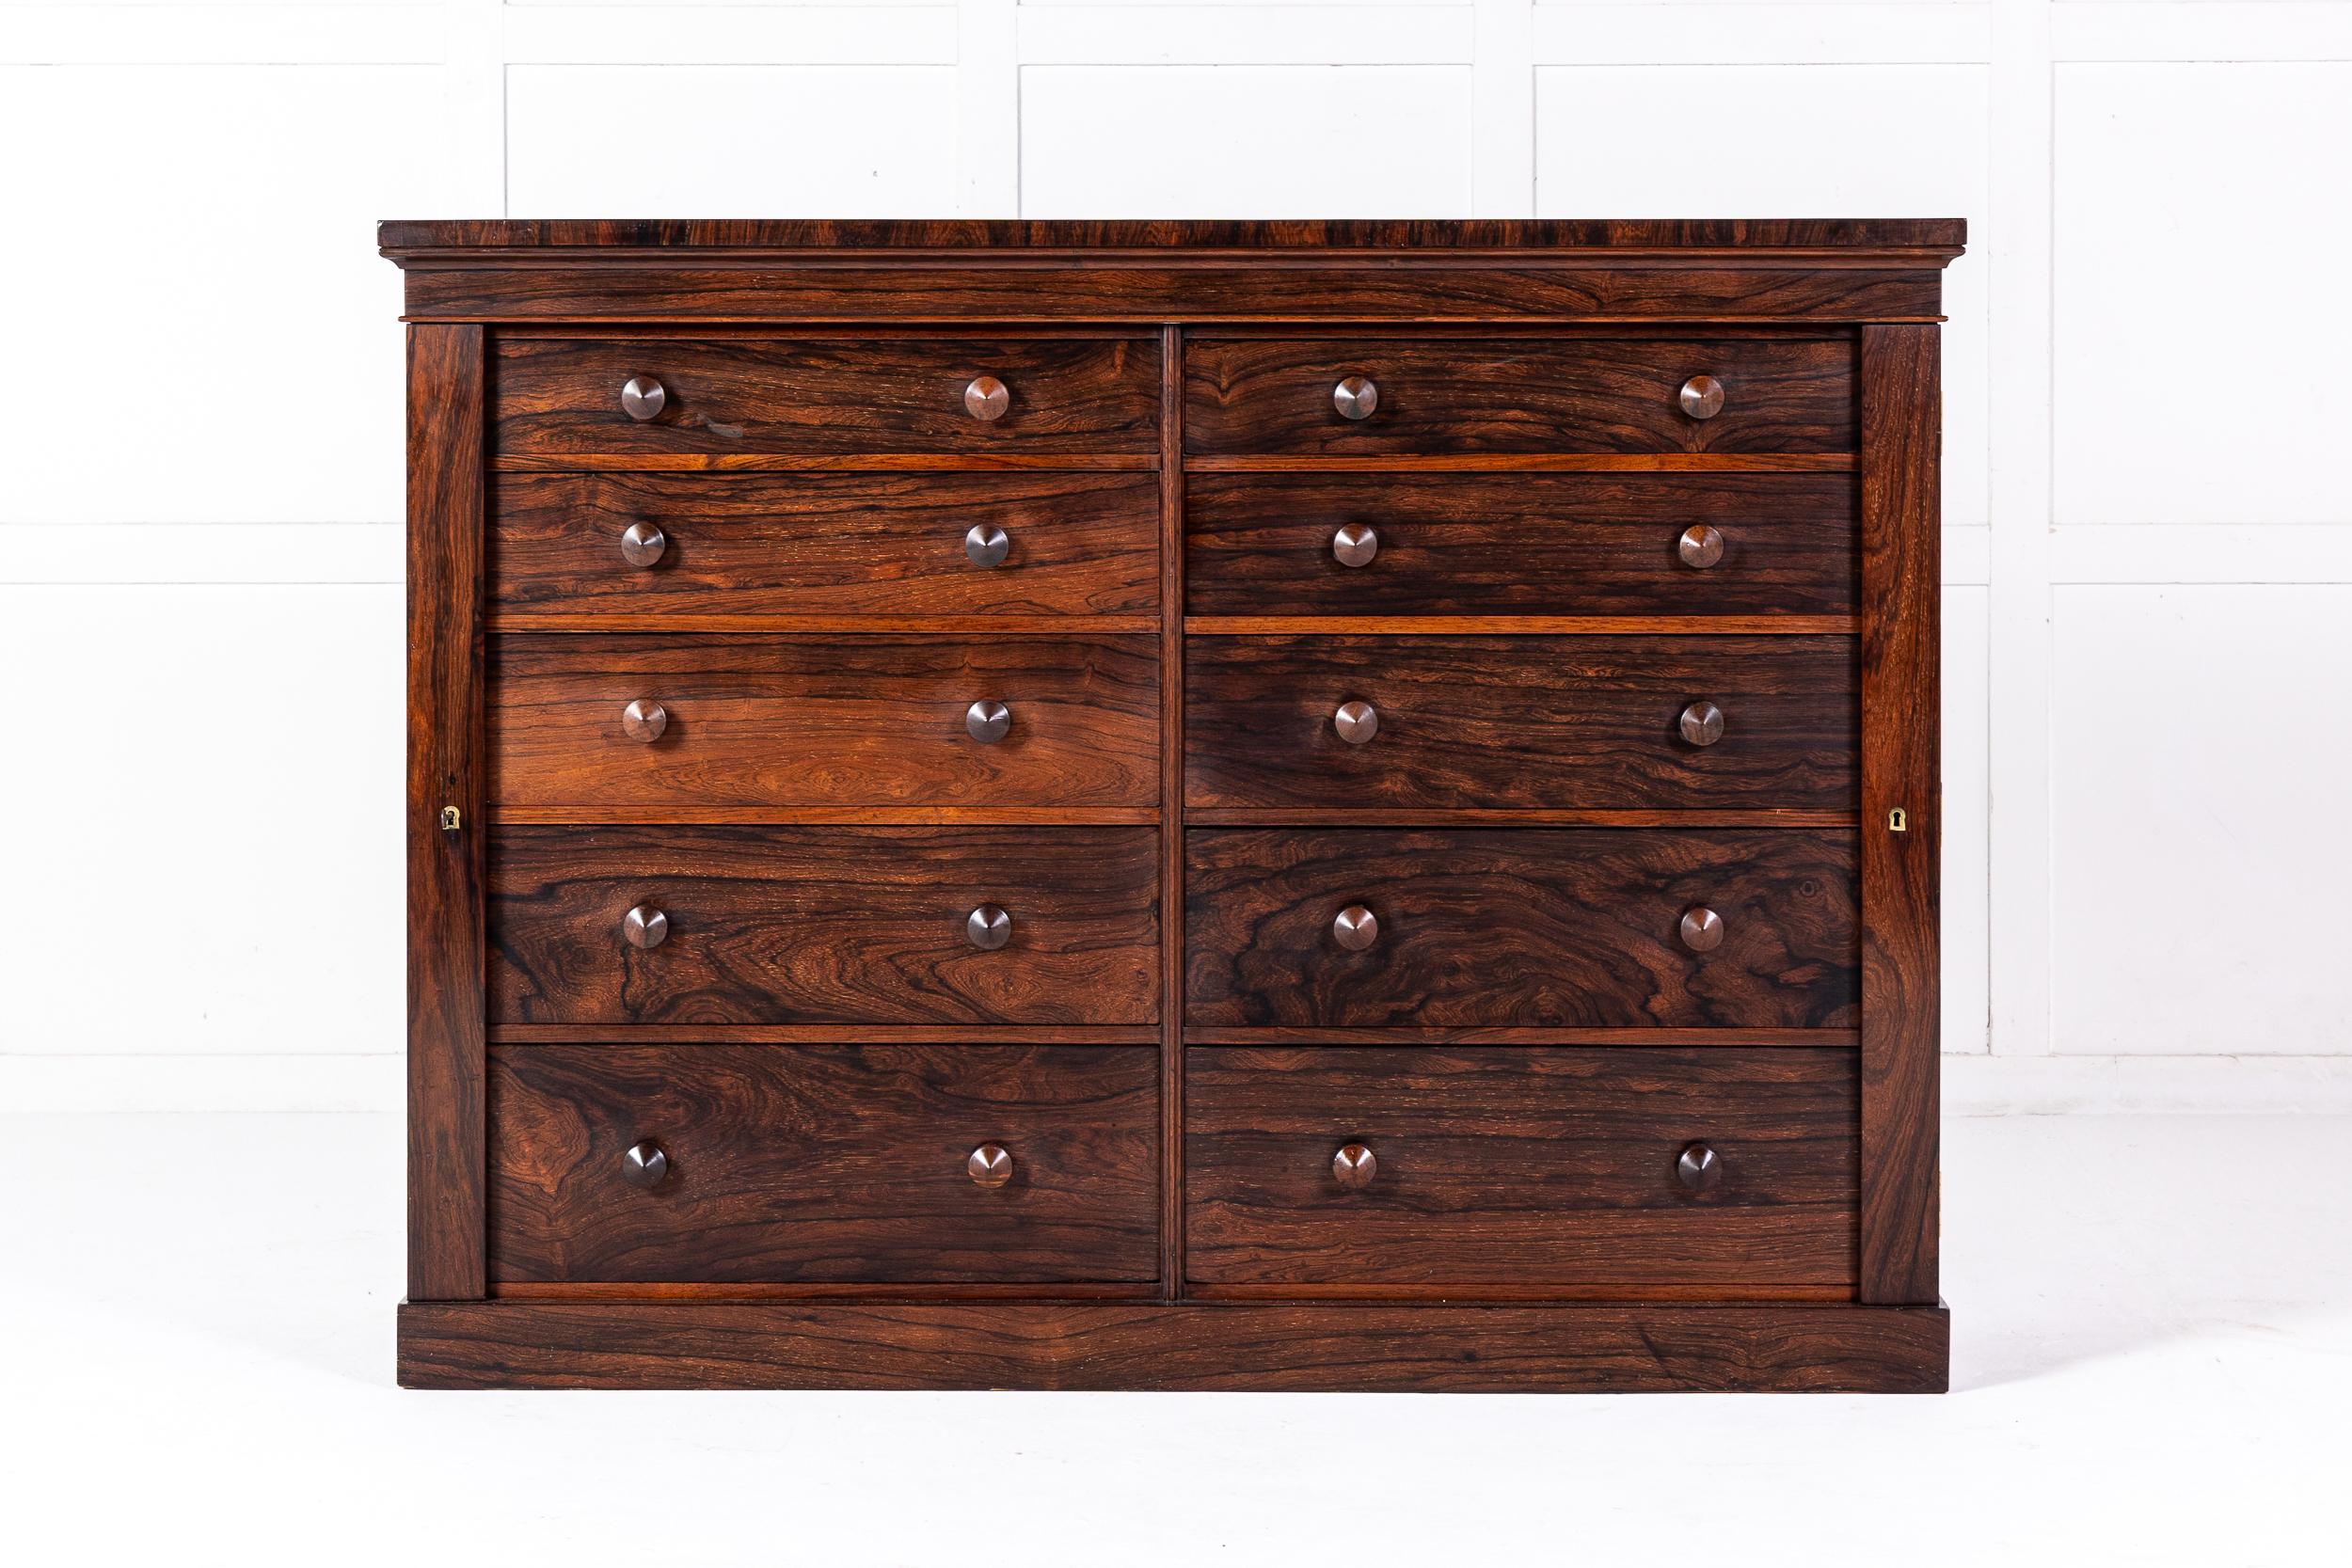 A 19th Century English Rosewood Collector's Chest or Bank of Lockable Drawers.

Made in England in the middle of the 19th century, this fine piece of furniture was designed as the filing cabinet of its day. It incorporates two independent banks of